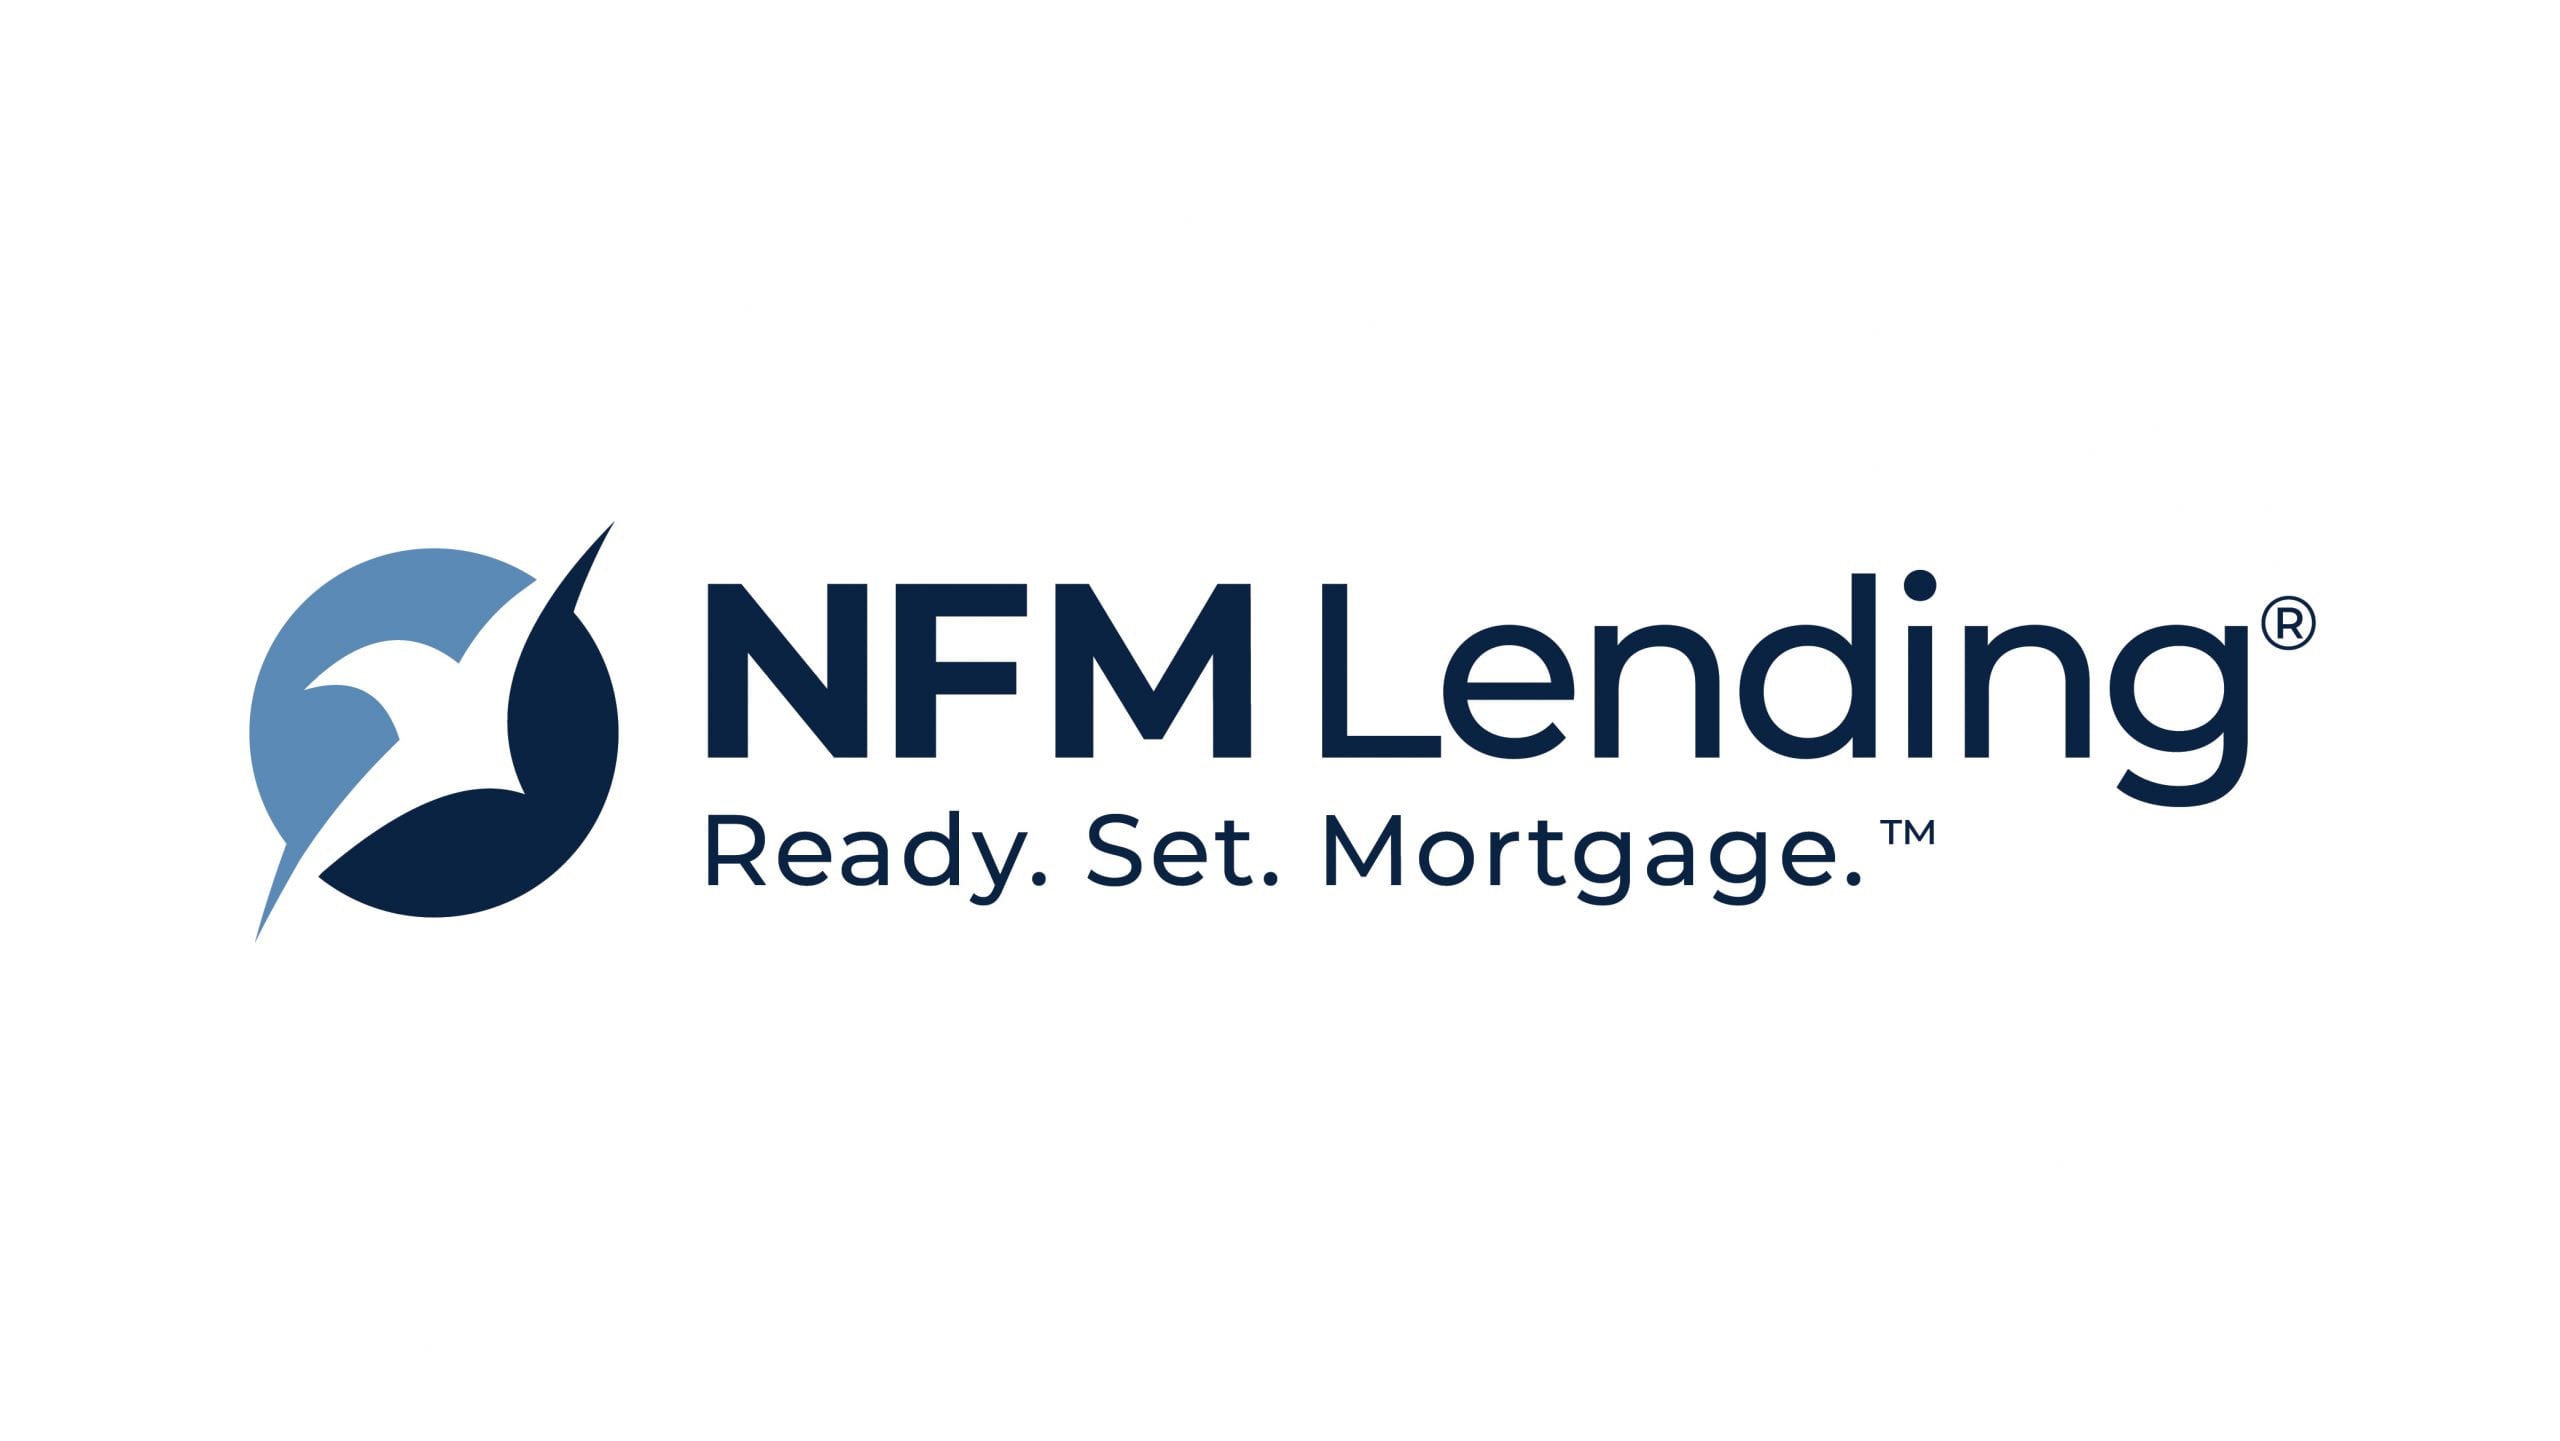 What Is NFM Lending